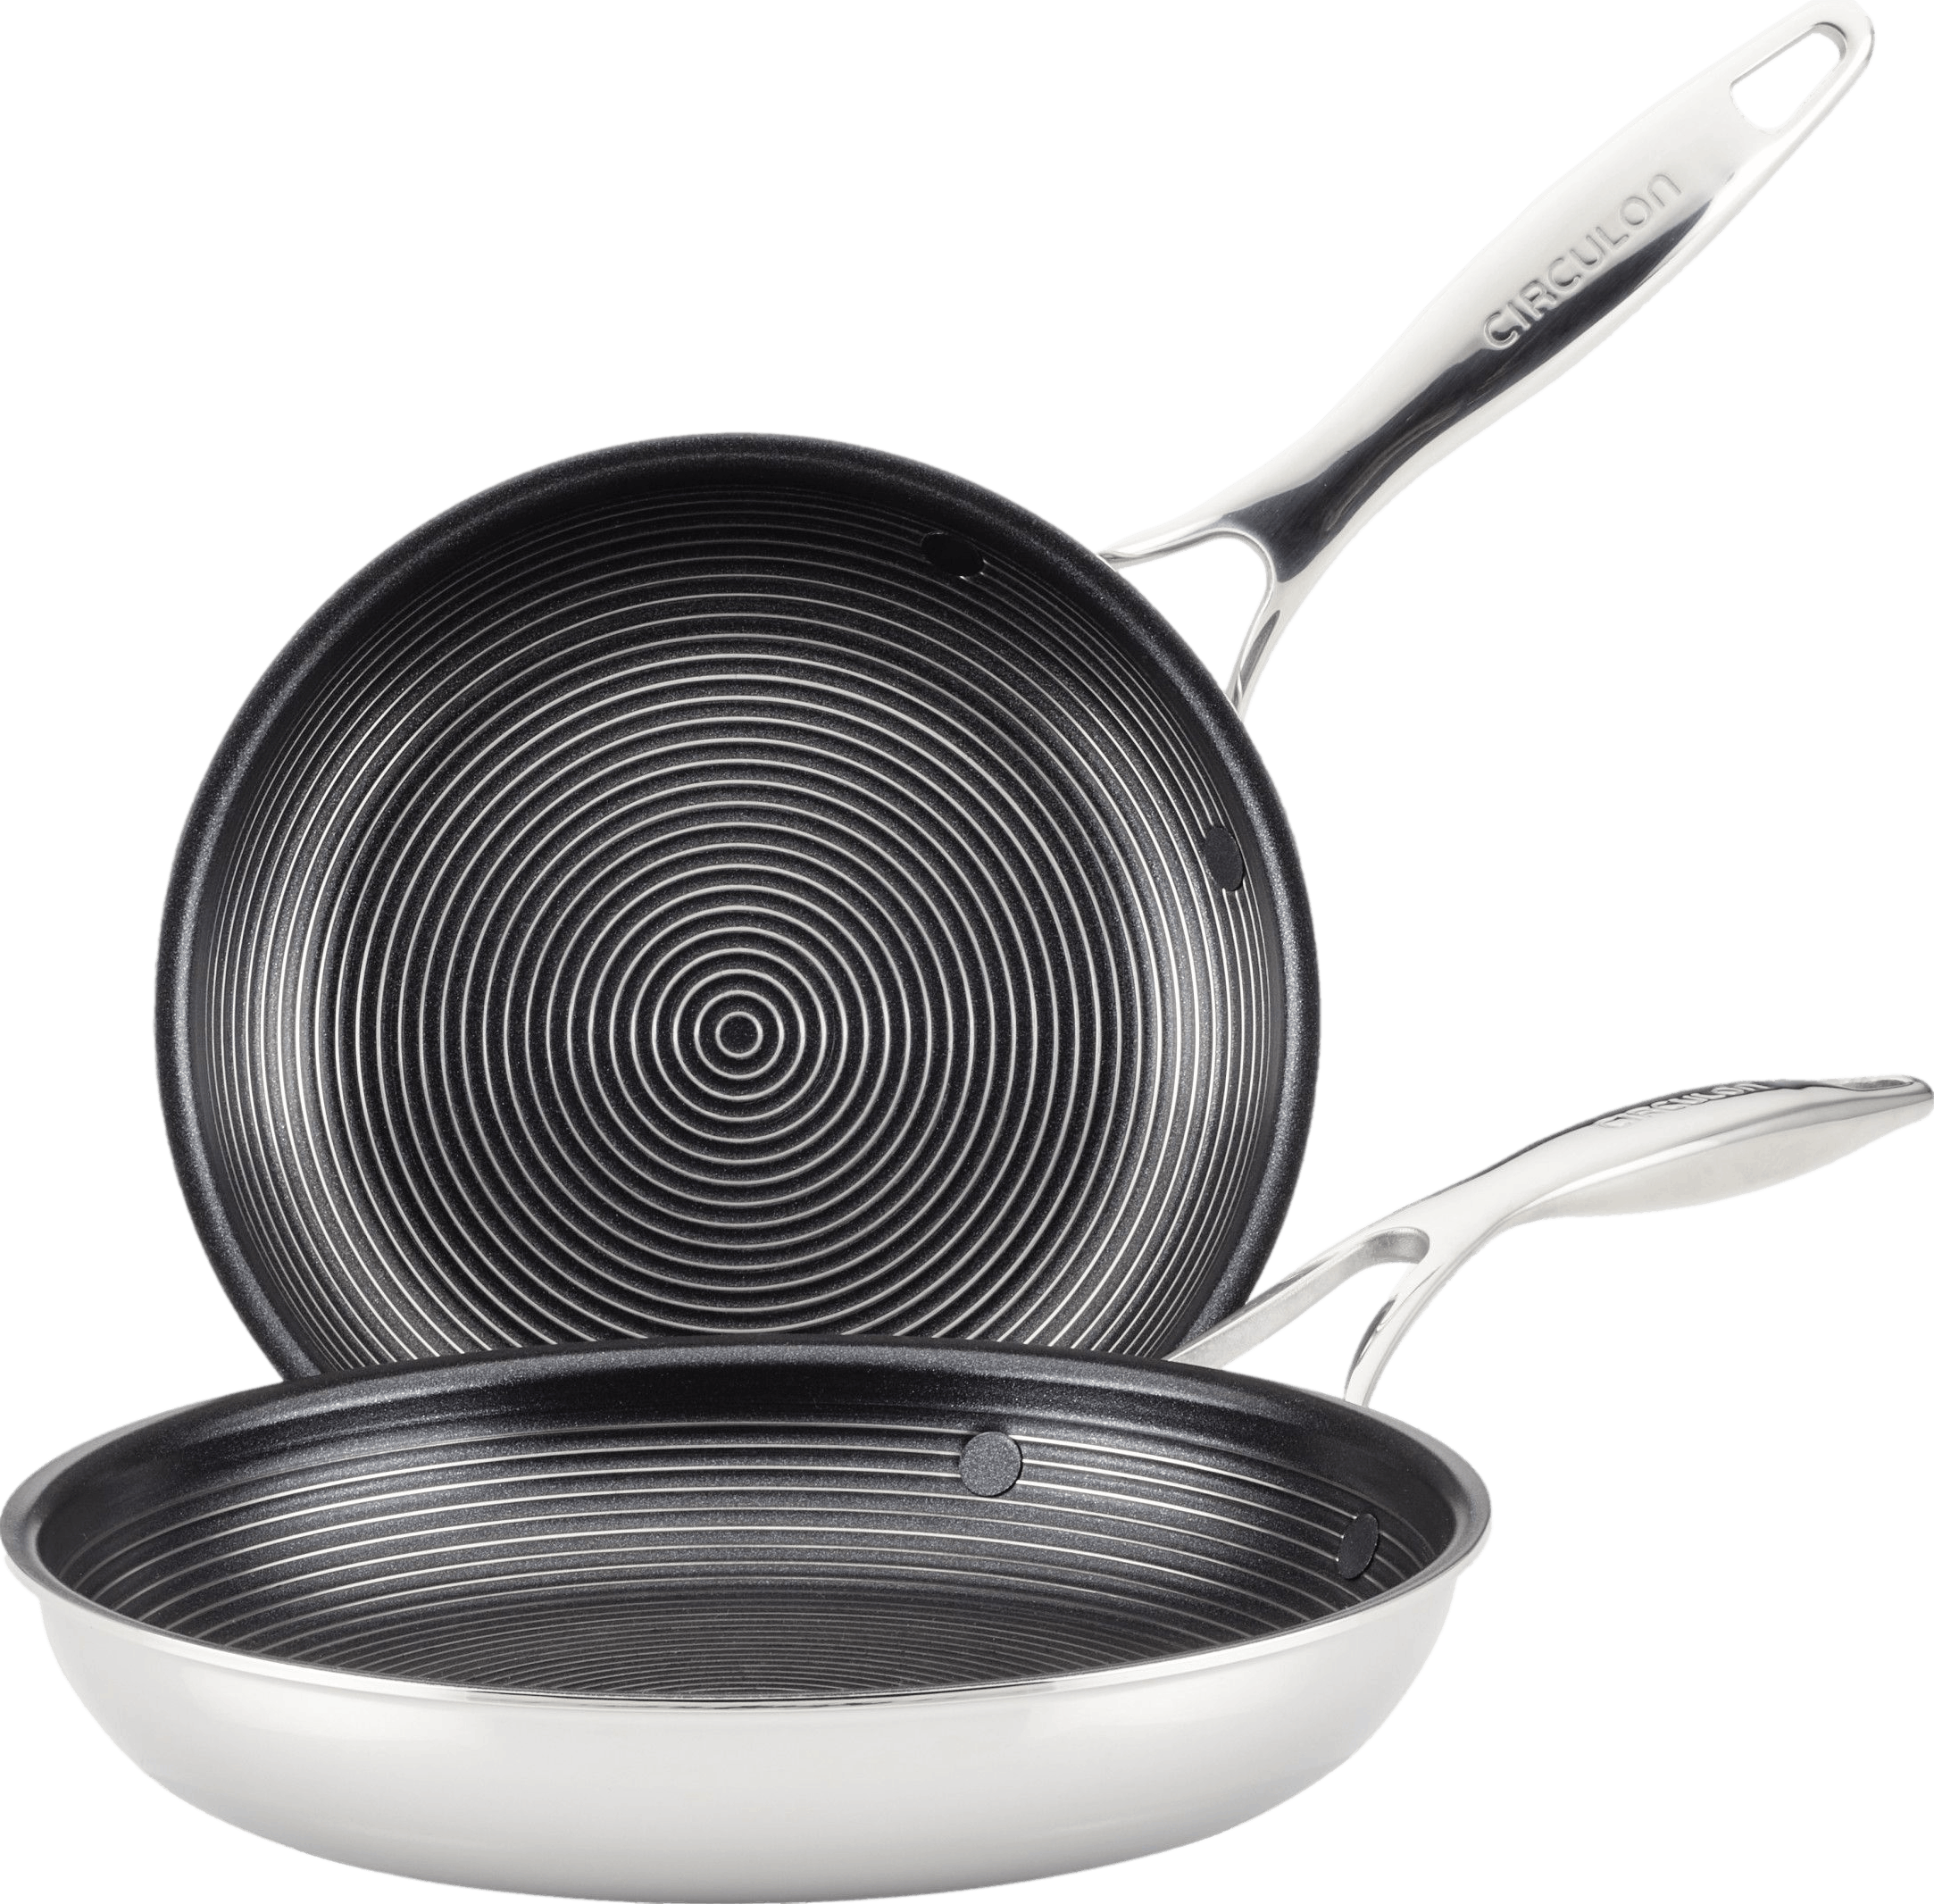 Circulon Clad Stainless Steel Cookware and Utensil Set with Hybrid